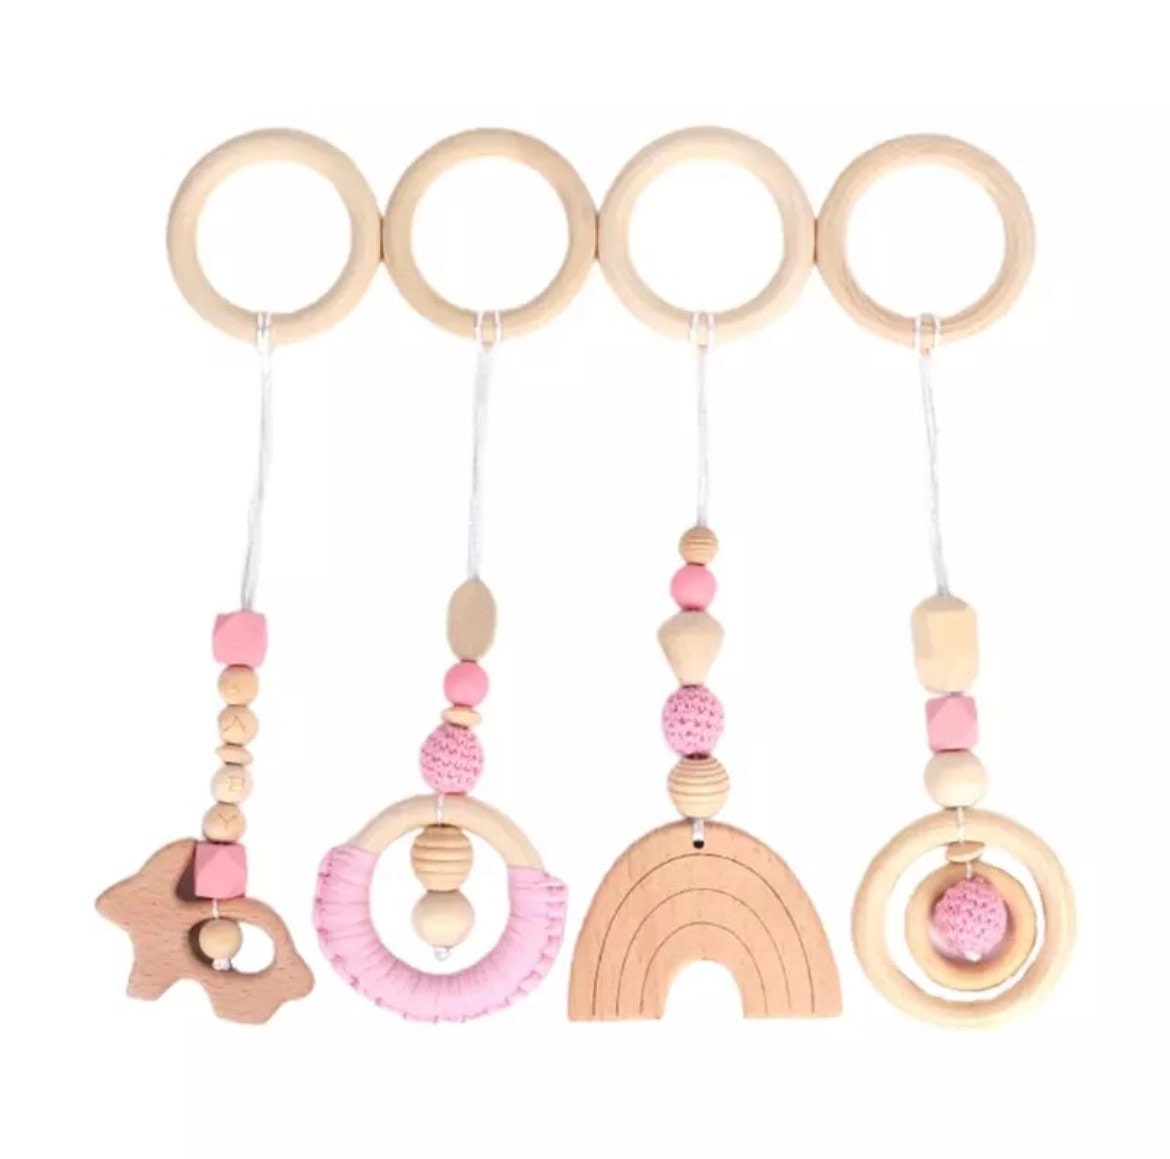 Wood Baby Montessori Gym & Toys-Gorgeous Wood Baby Play Gym Toys Set of 4These toys assist your babies fitness -perfect for lively babies and can exercise the child's physical coordination ability.-Bijou Bubs